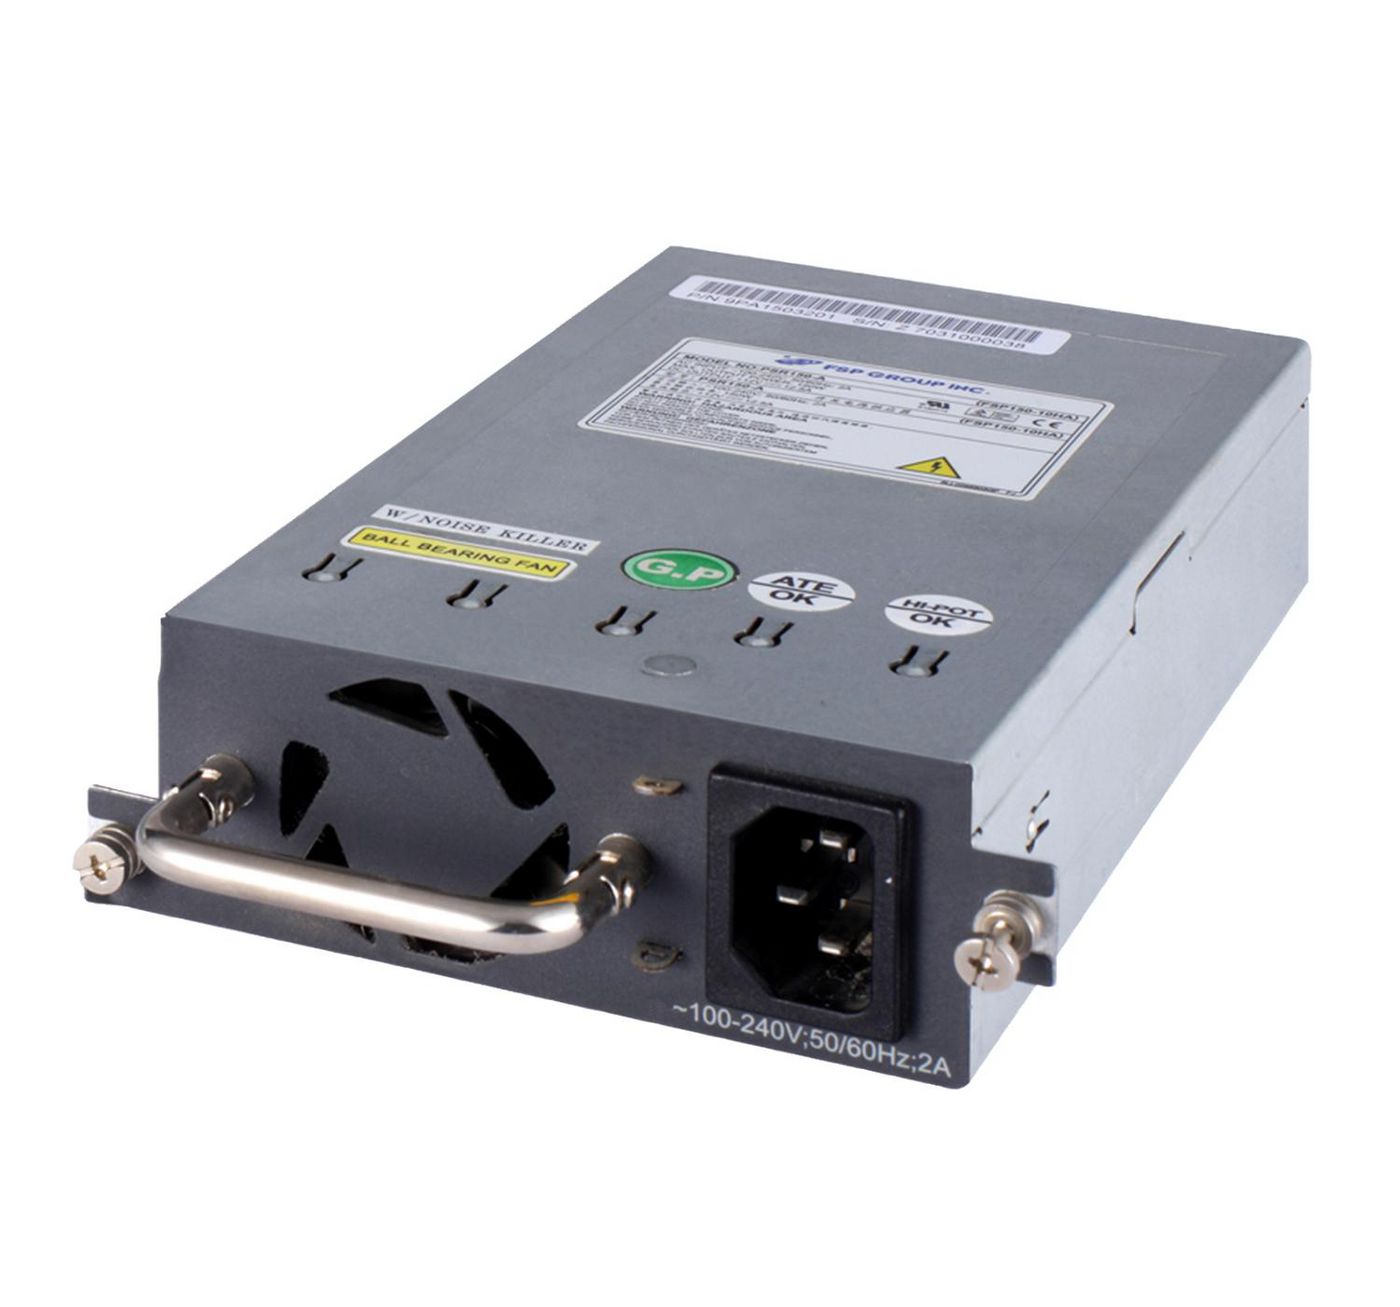 HPE 150W AC Power Supply for Arista 5500